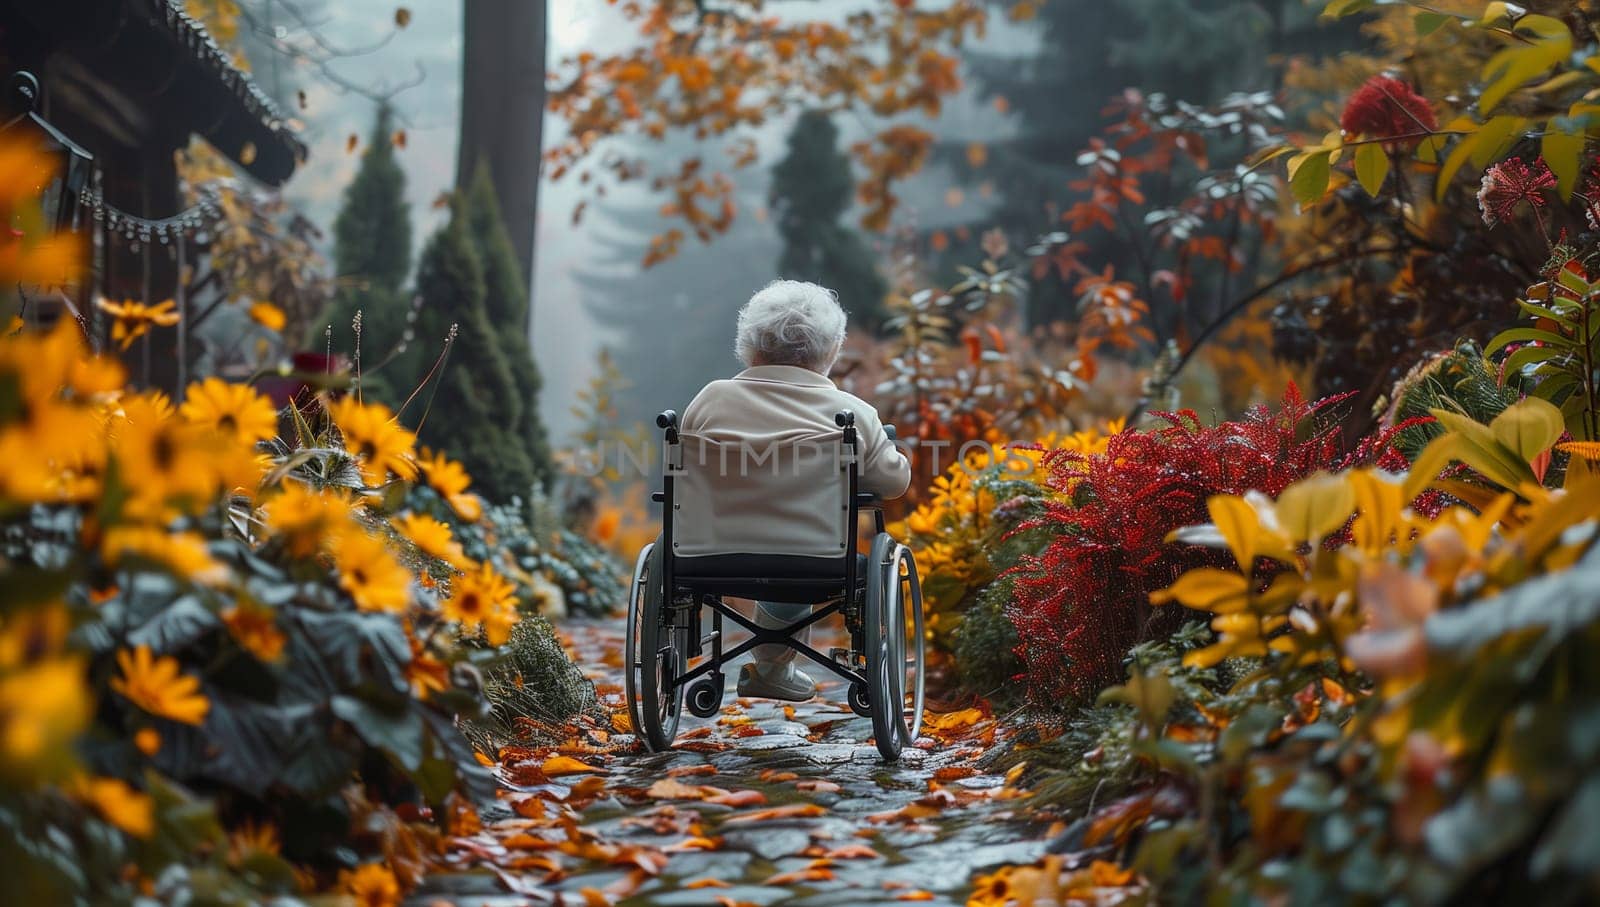 An elderly woman in a wheelchair is strolling through a lush garden filled with vibrant flowers, plants, and shrubs, basking in the warm sunlight and enjoying the natural landscape